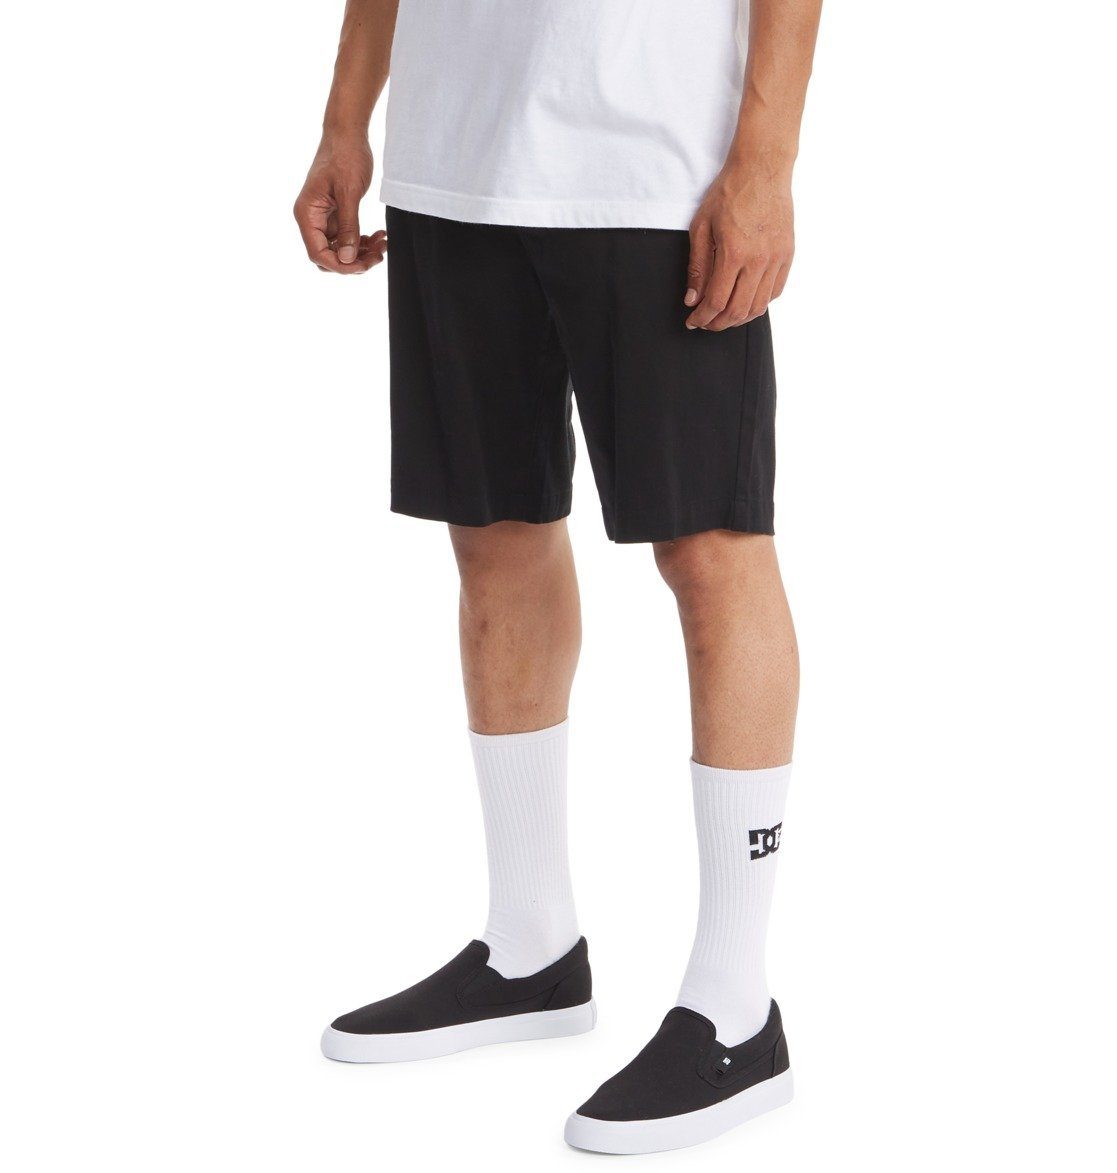 Shoes Worker Black Chinoshorts DC